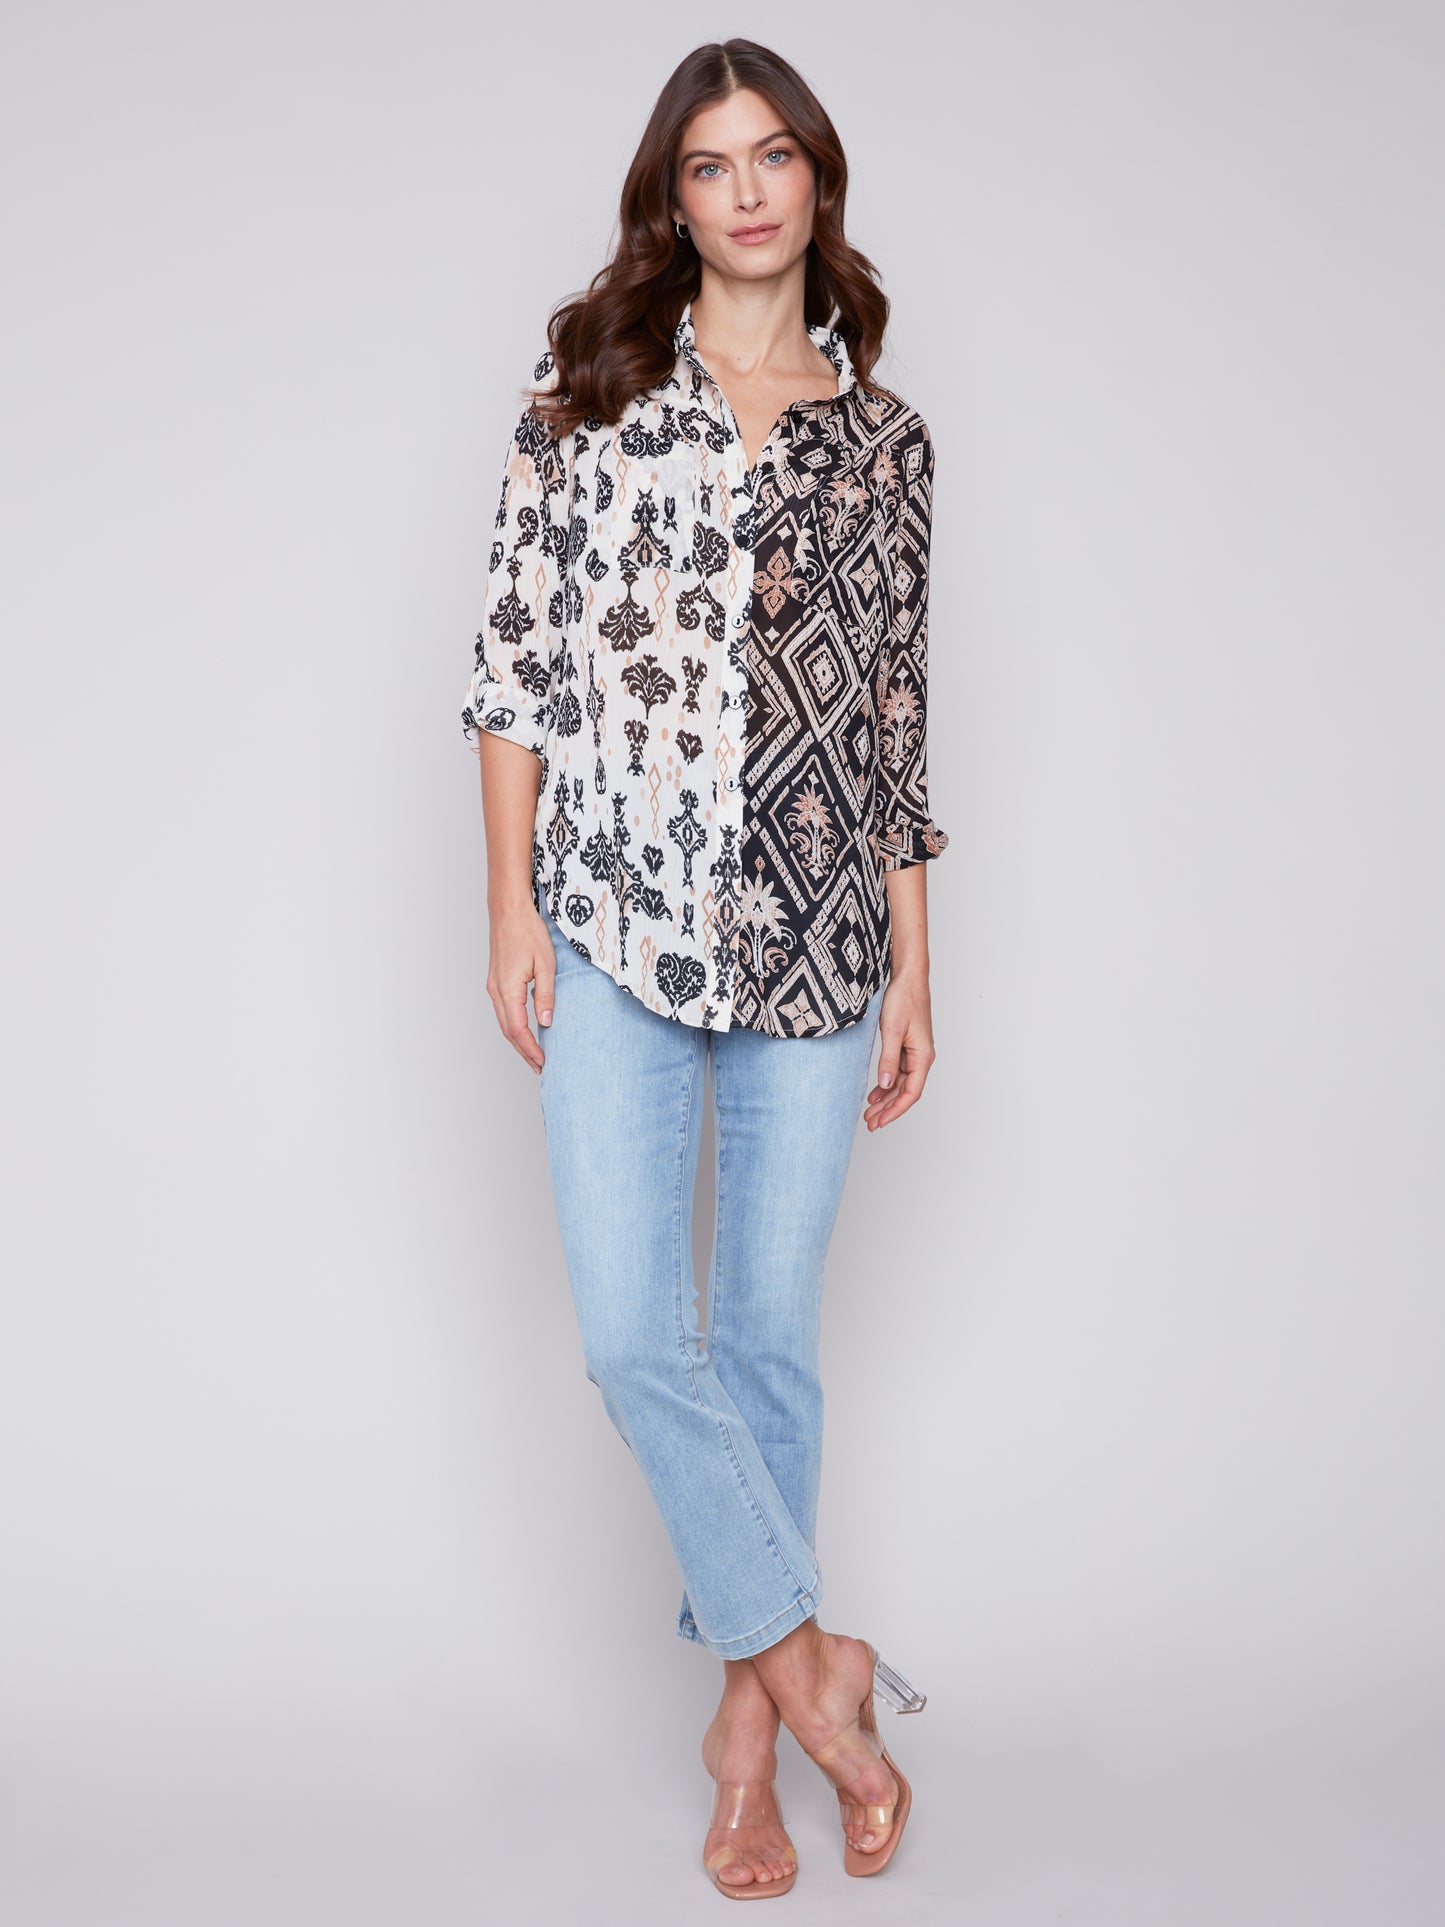 A woman wearing a Charlie B Crinkle Georgette Blouse, a lightweight Damask color printed fabric.